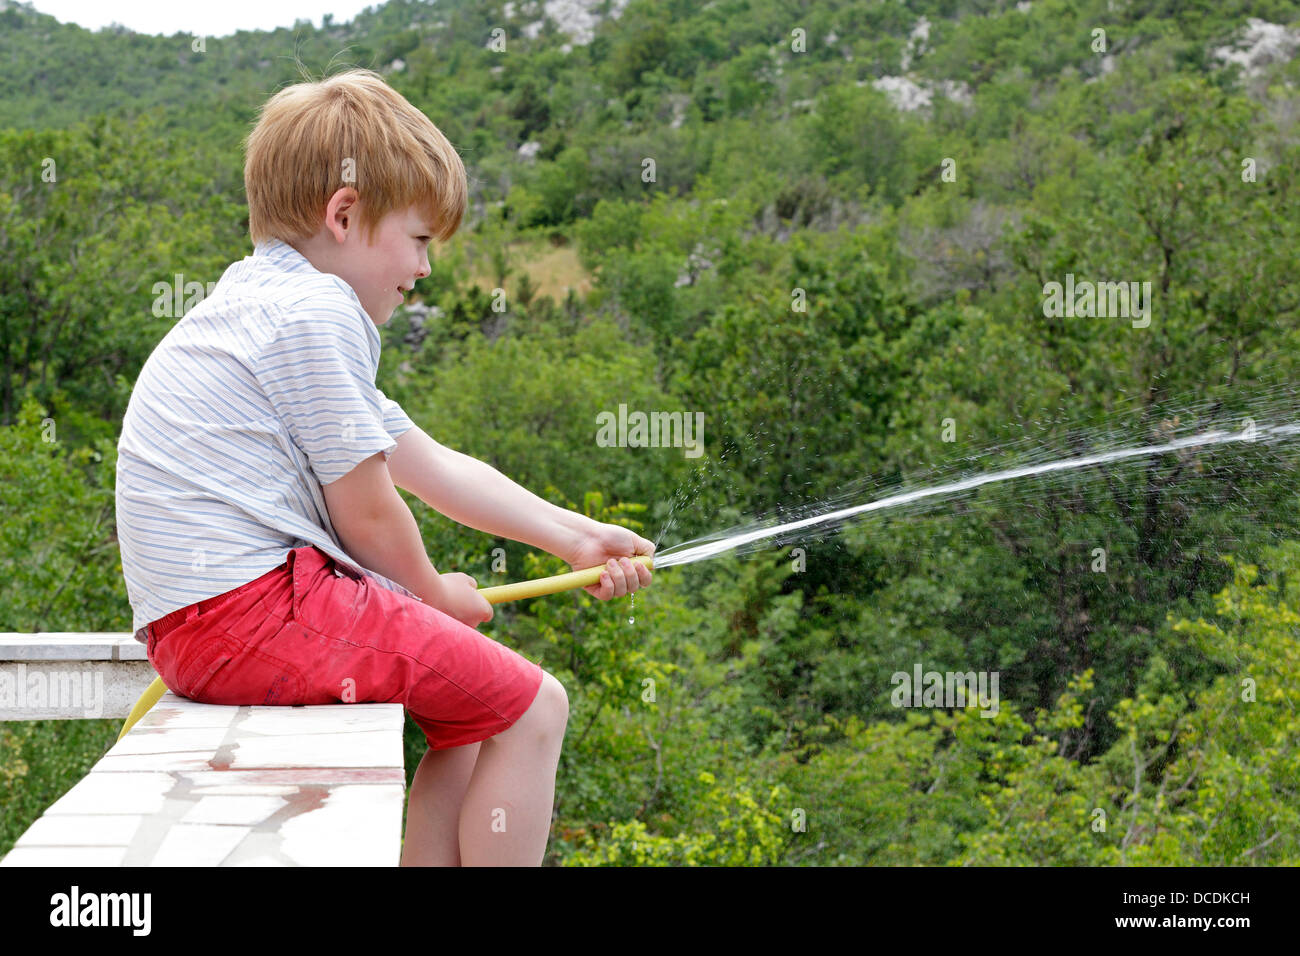 portrait of a young boy boy watering the garden Stock Photo